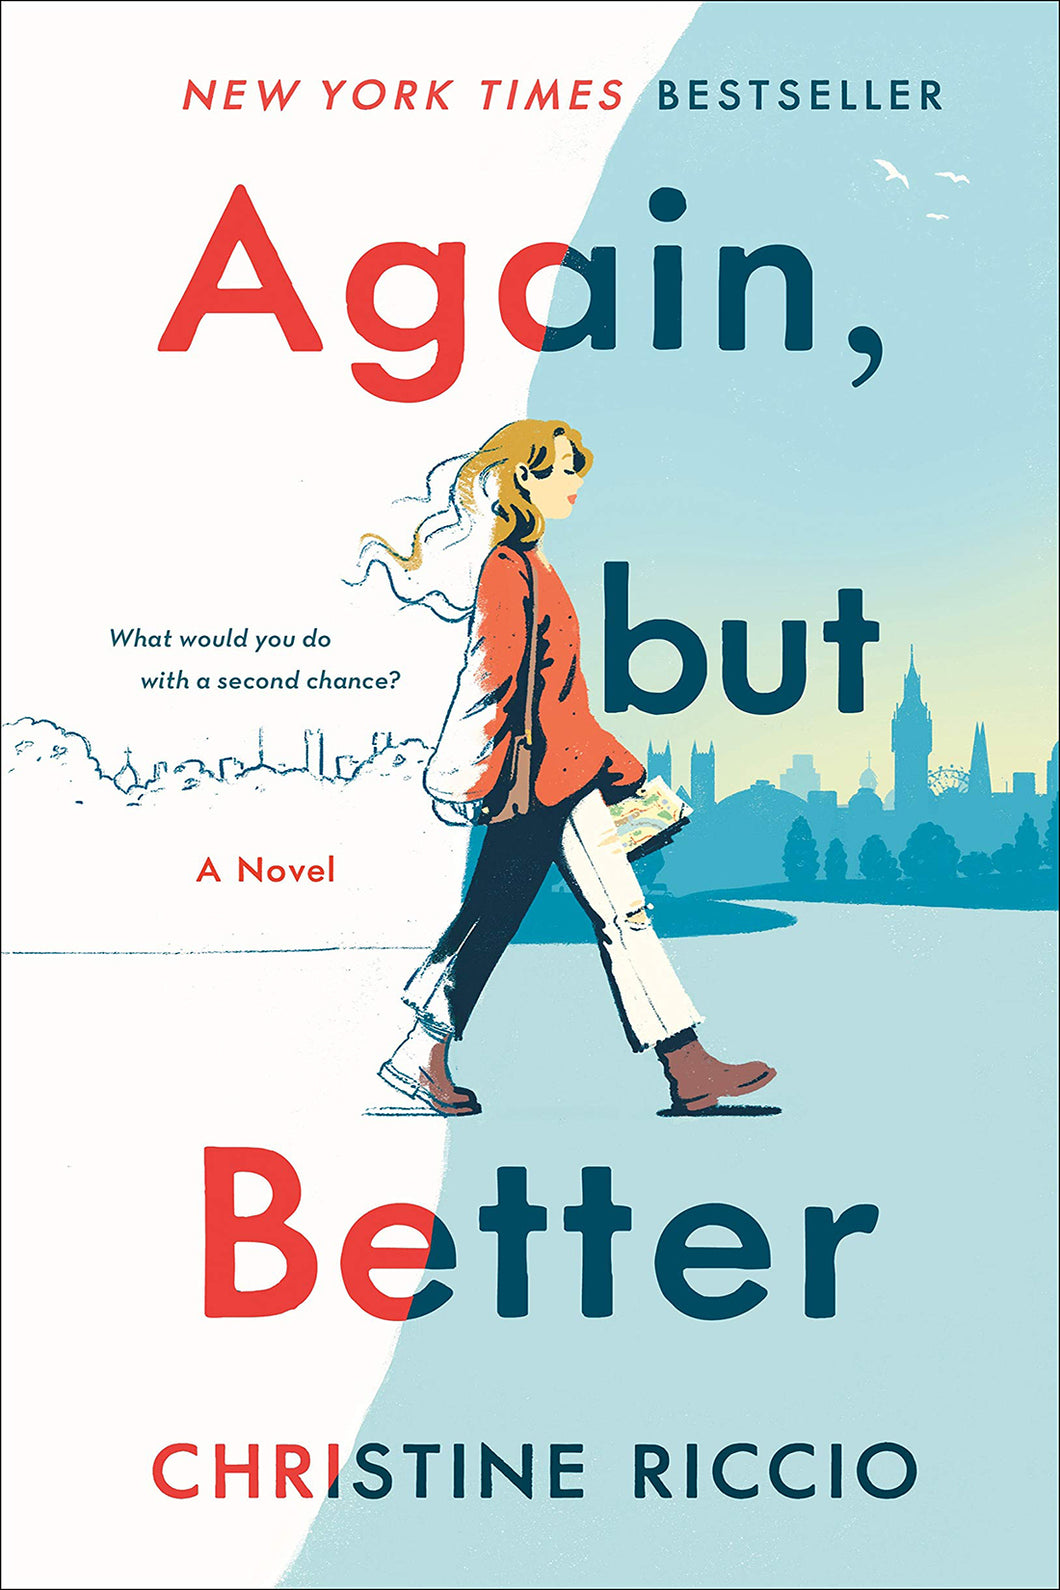 Again, but Better by Christine Riccio / Hardcover or Paperback - NEW BOOK